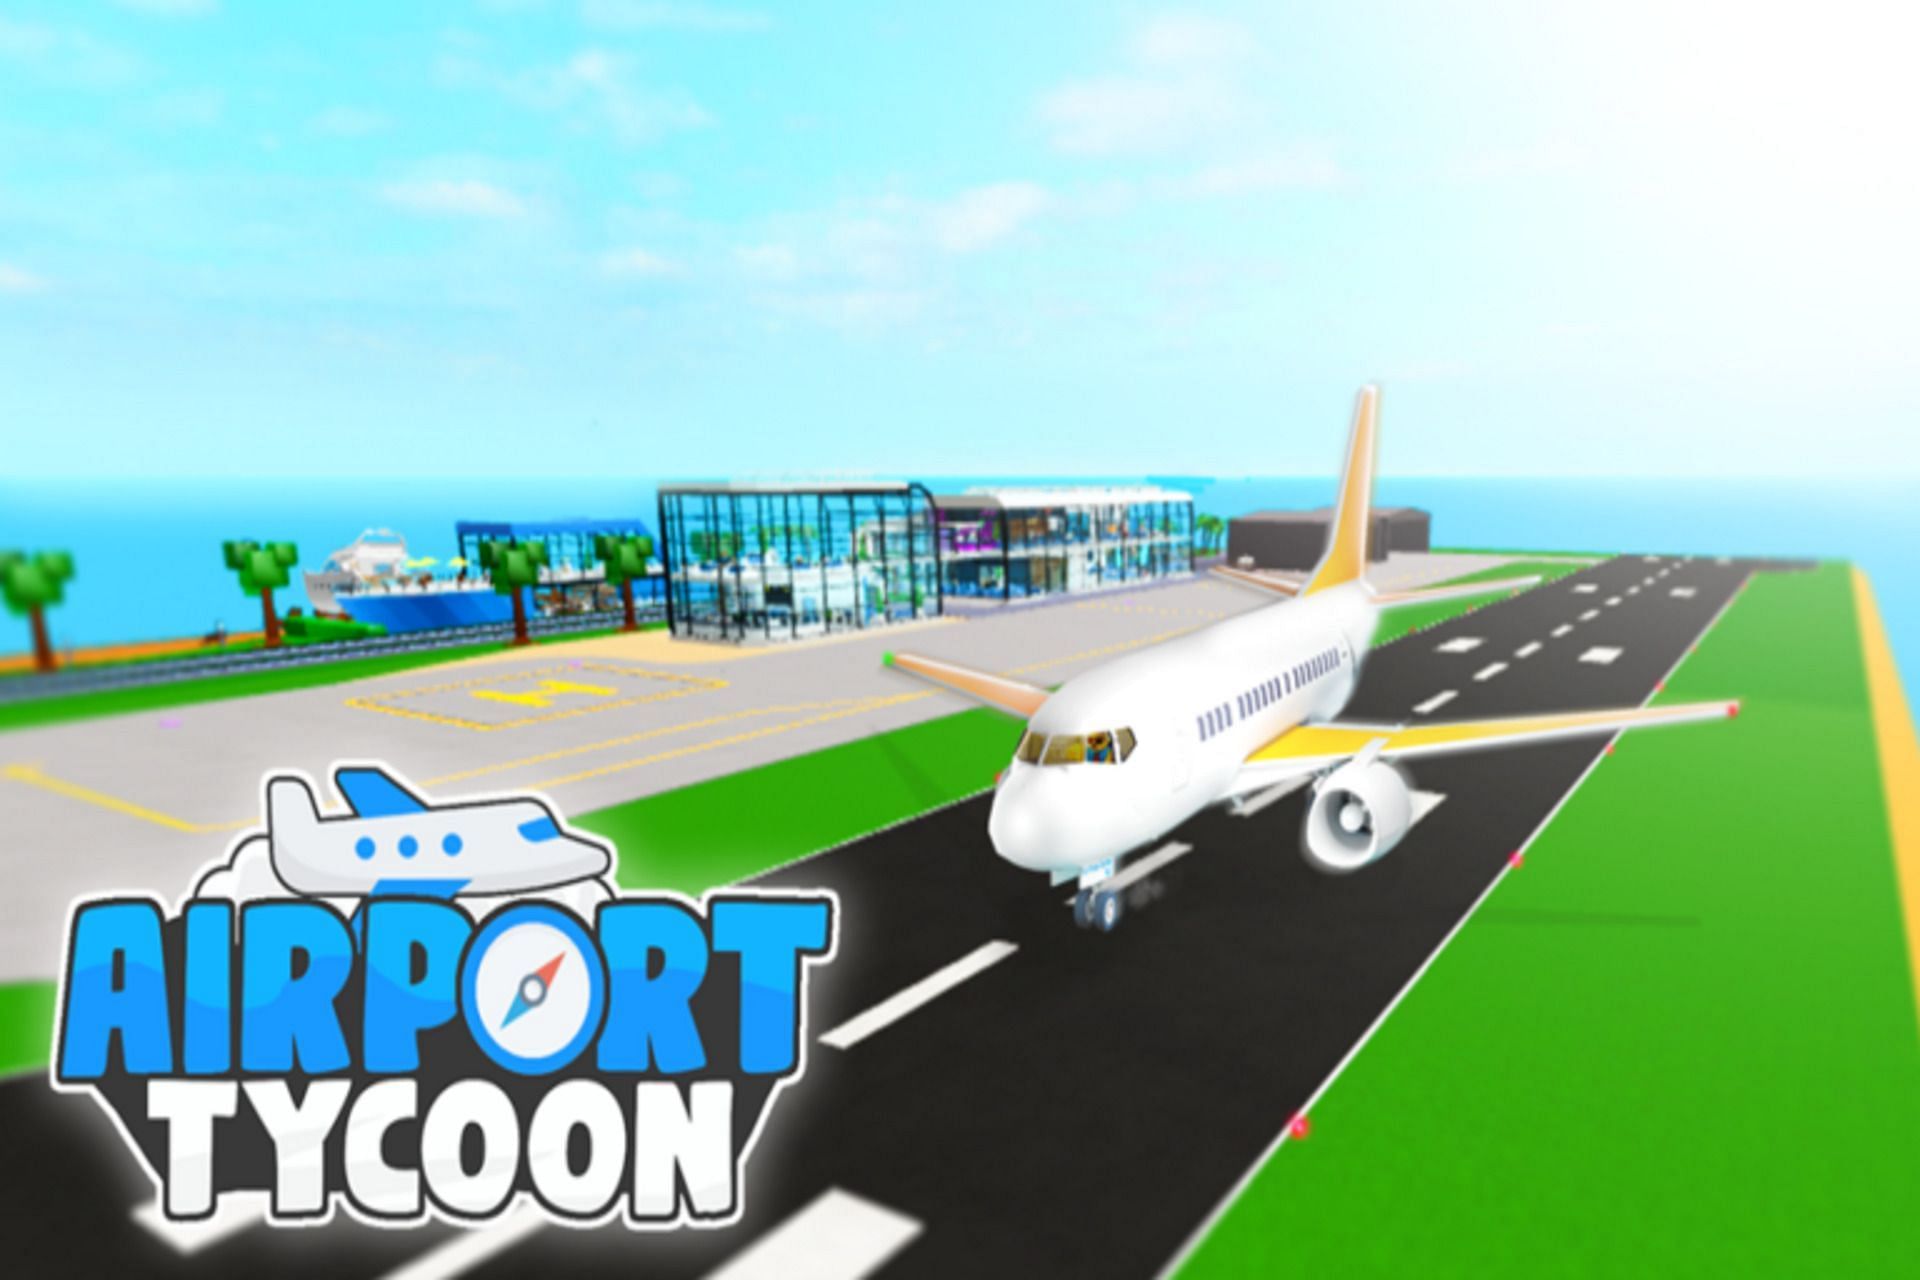 Redeem these codes to plan out your own cool Airport in Airport Tycoon (Image via Roblox)